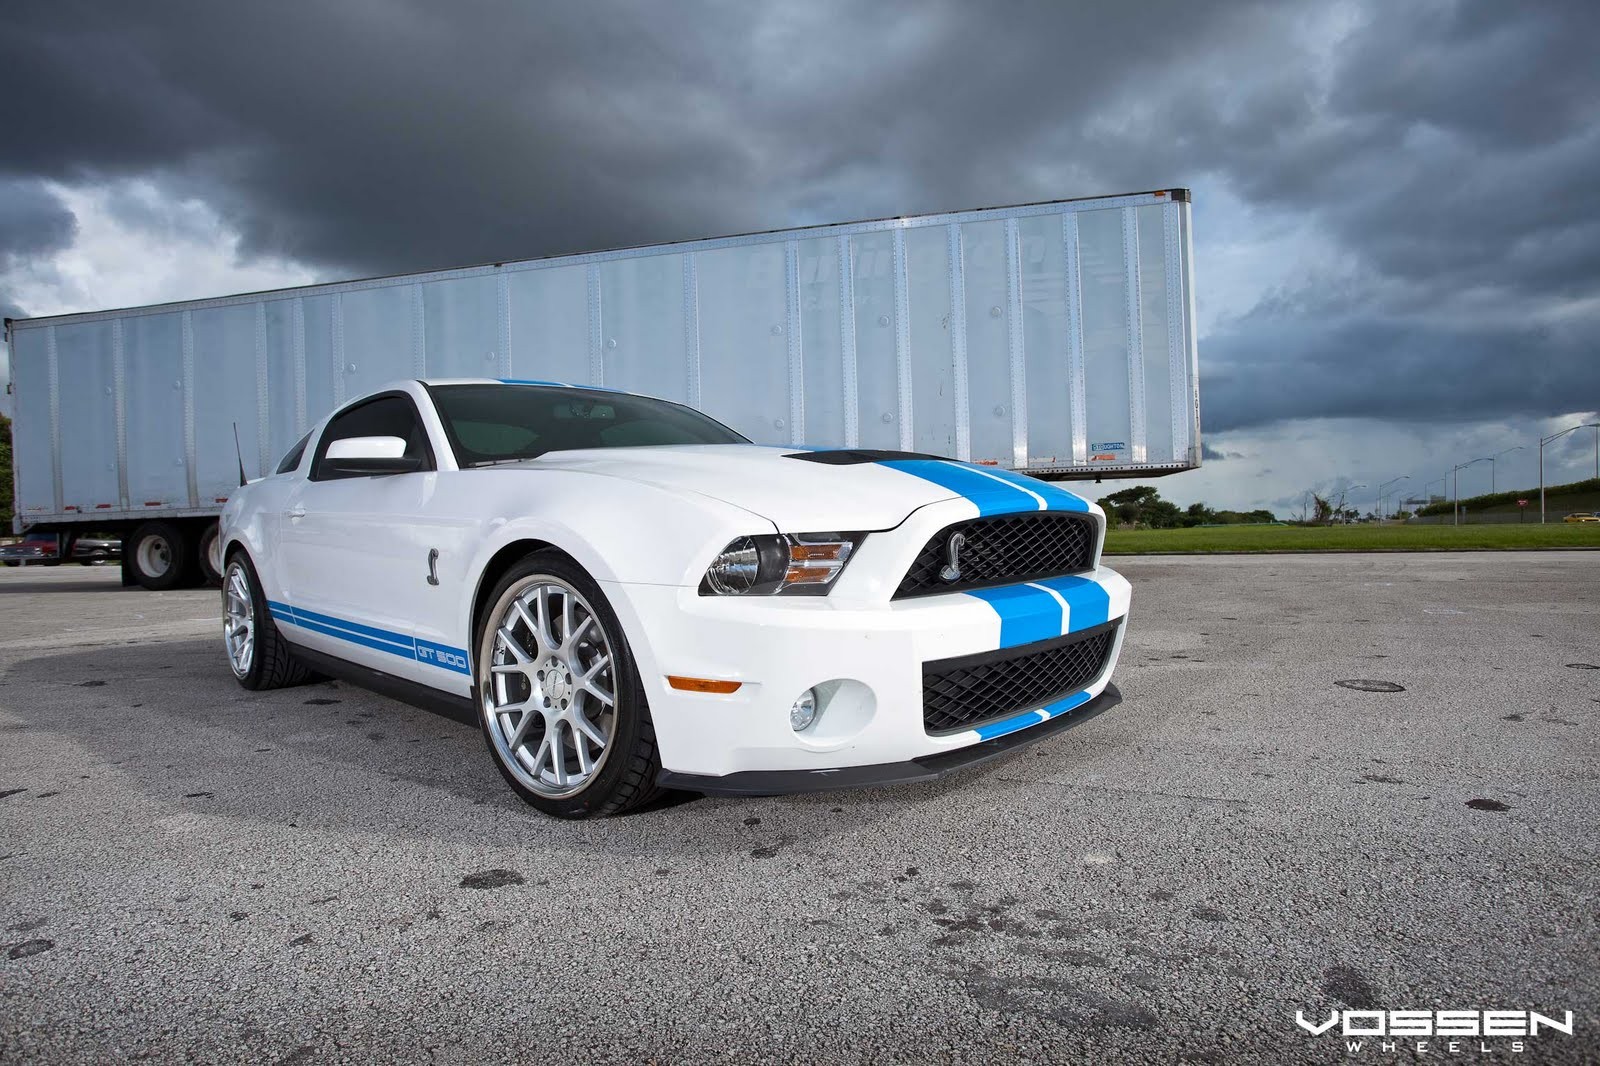 General 1600x1066 car Ford white cars vehicle Ford Mustang Ford Mustang S-197 II racing stripes muscle cars American cars Shelby Ford Mustang Shelby Vossen